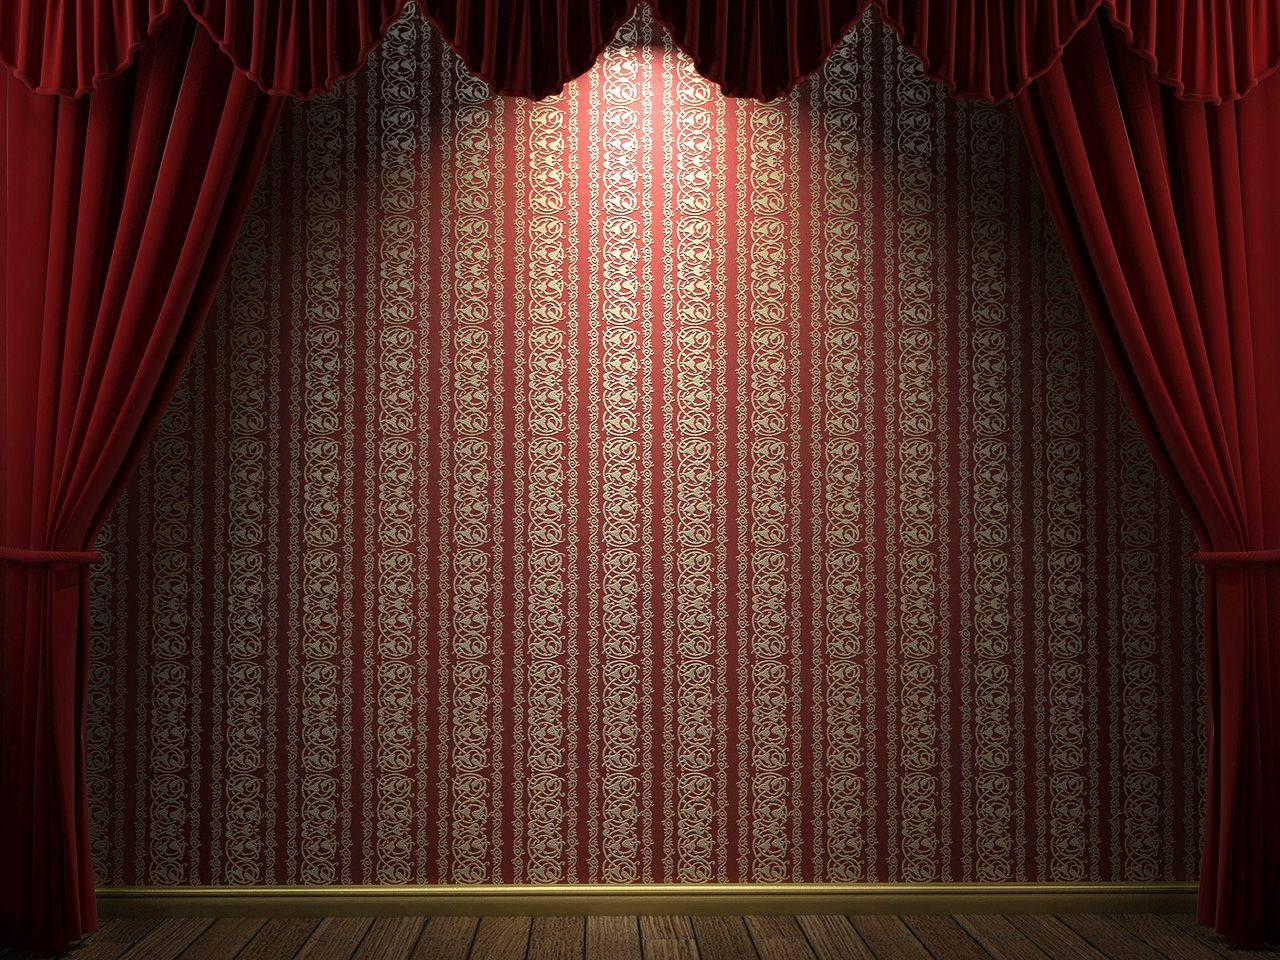 Free Red Velvet Theatre Curtains Background For PowerPoint